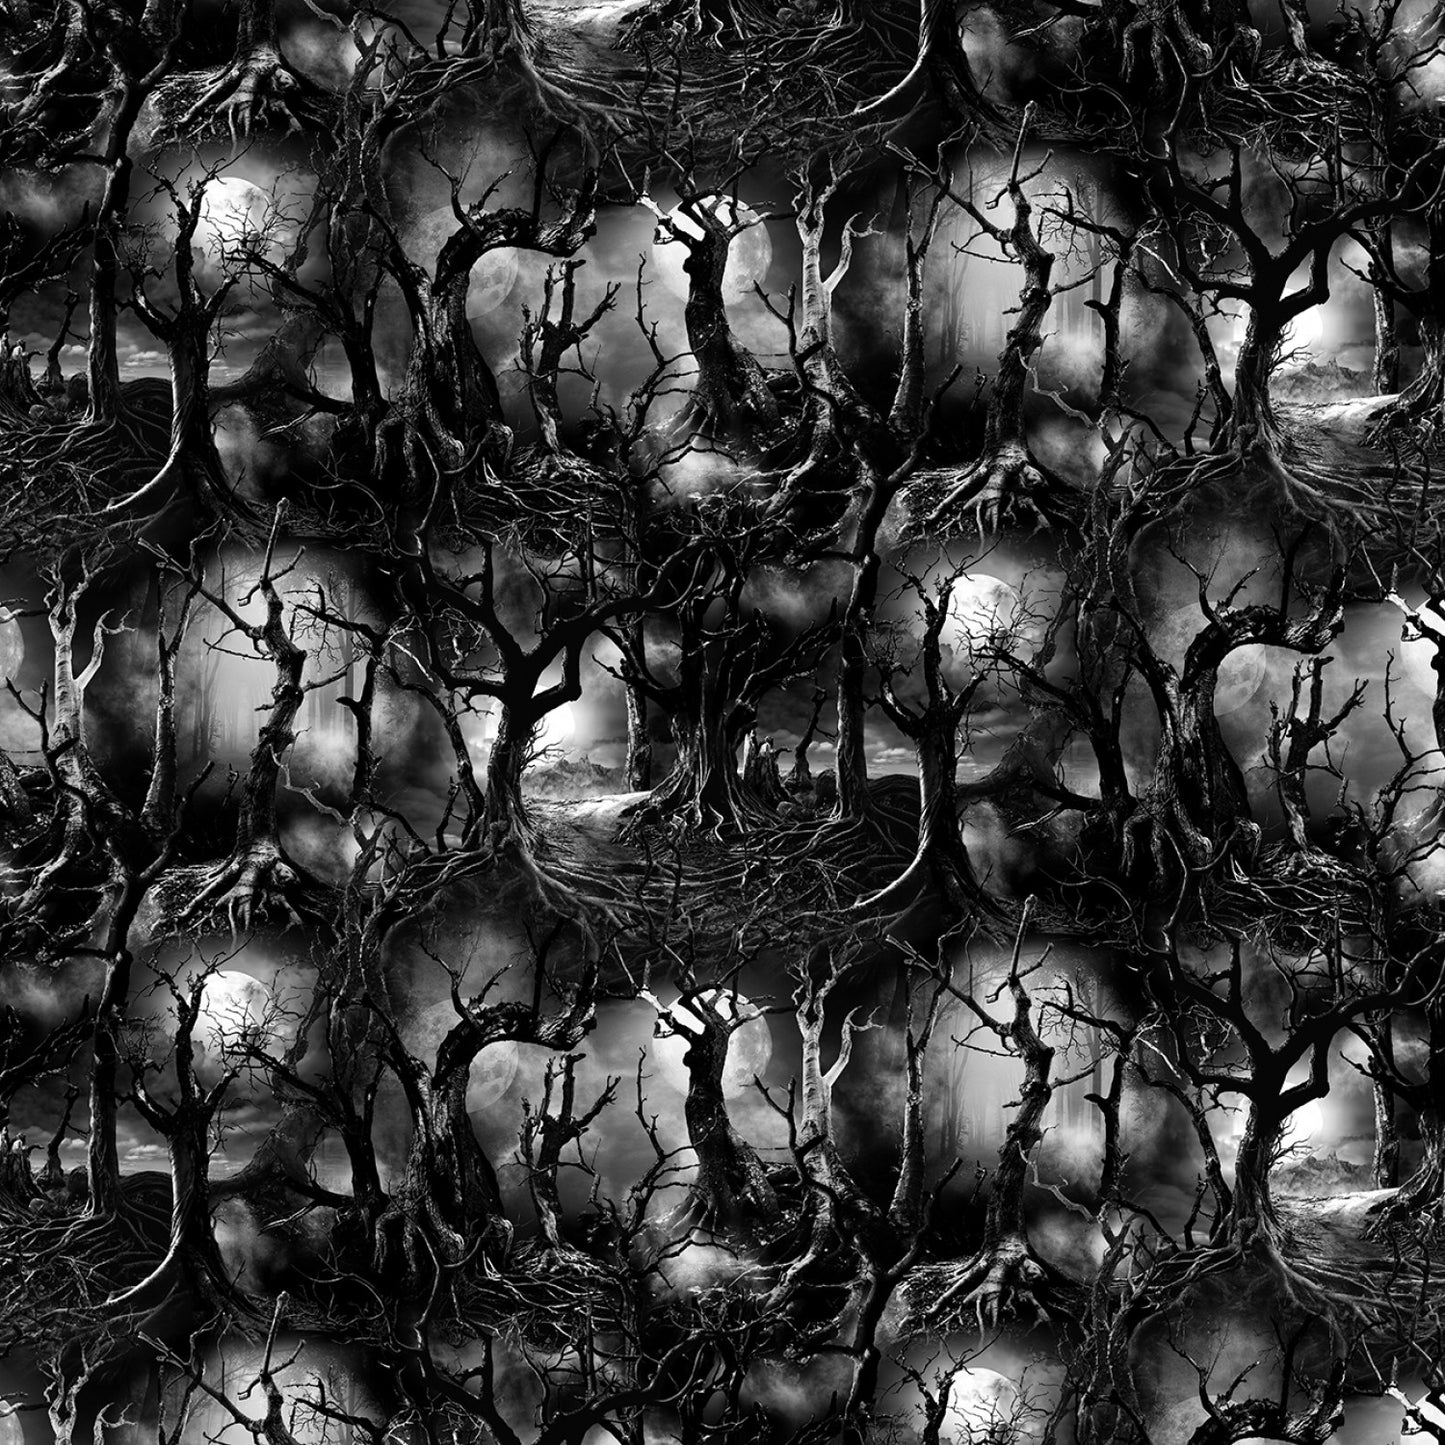 New Arrival: Wicked Spooky Creepey Dead Trees    CD2763-SPOOKY Cotton Woven Fabric